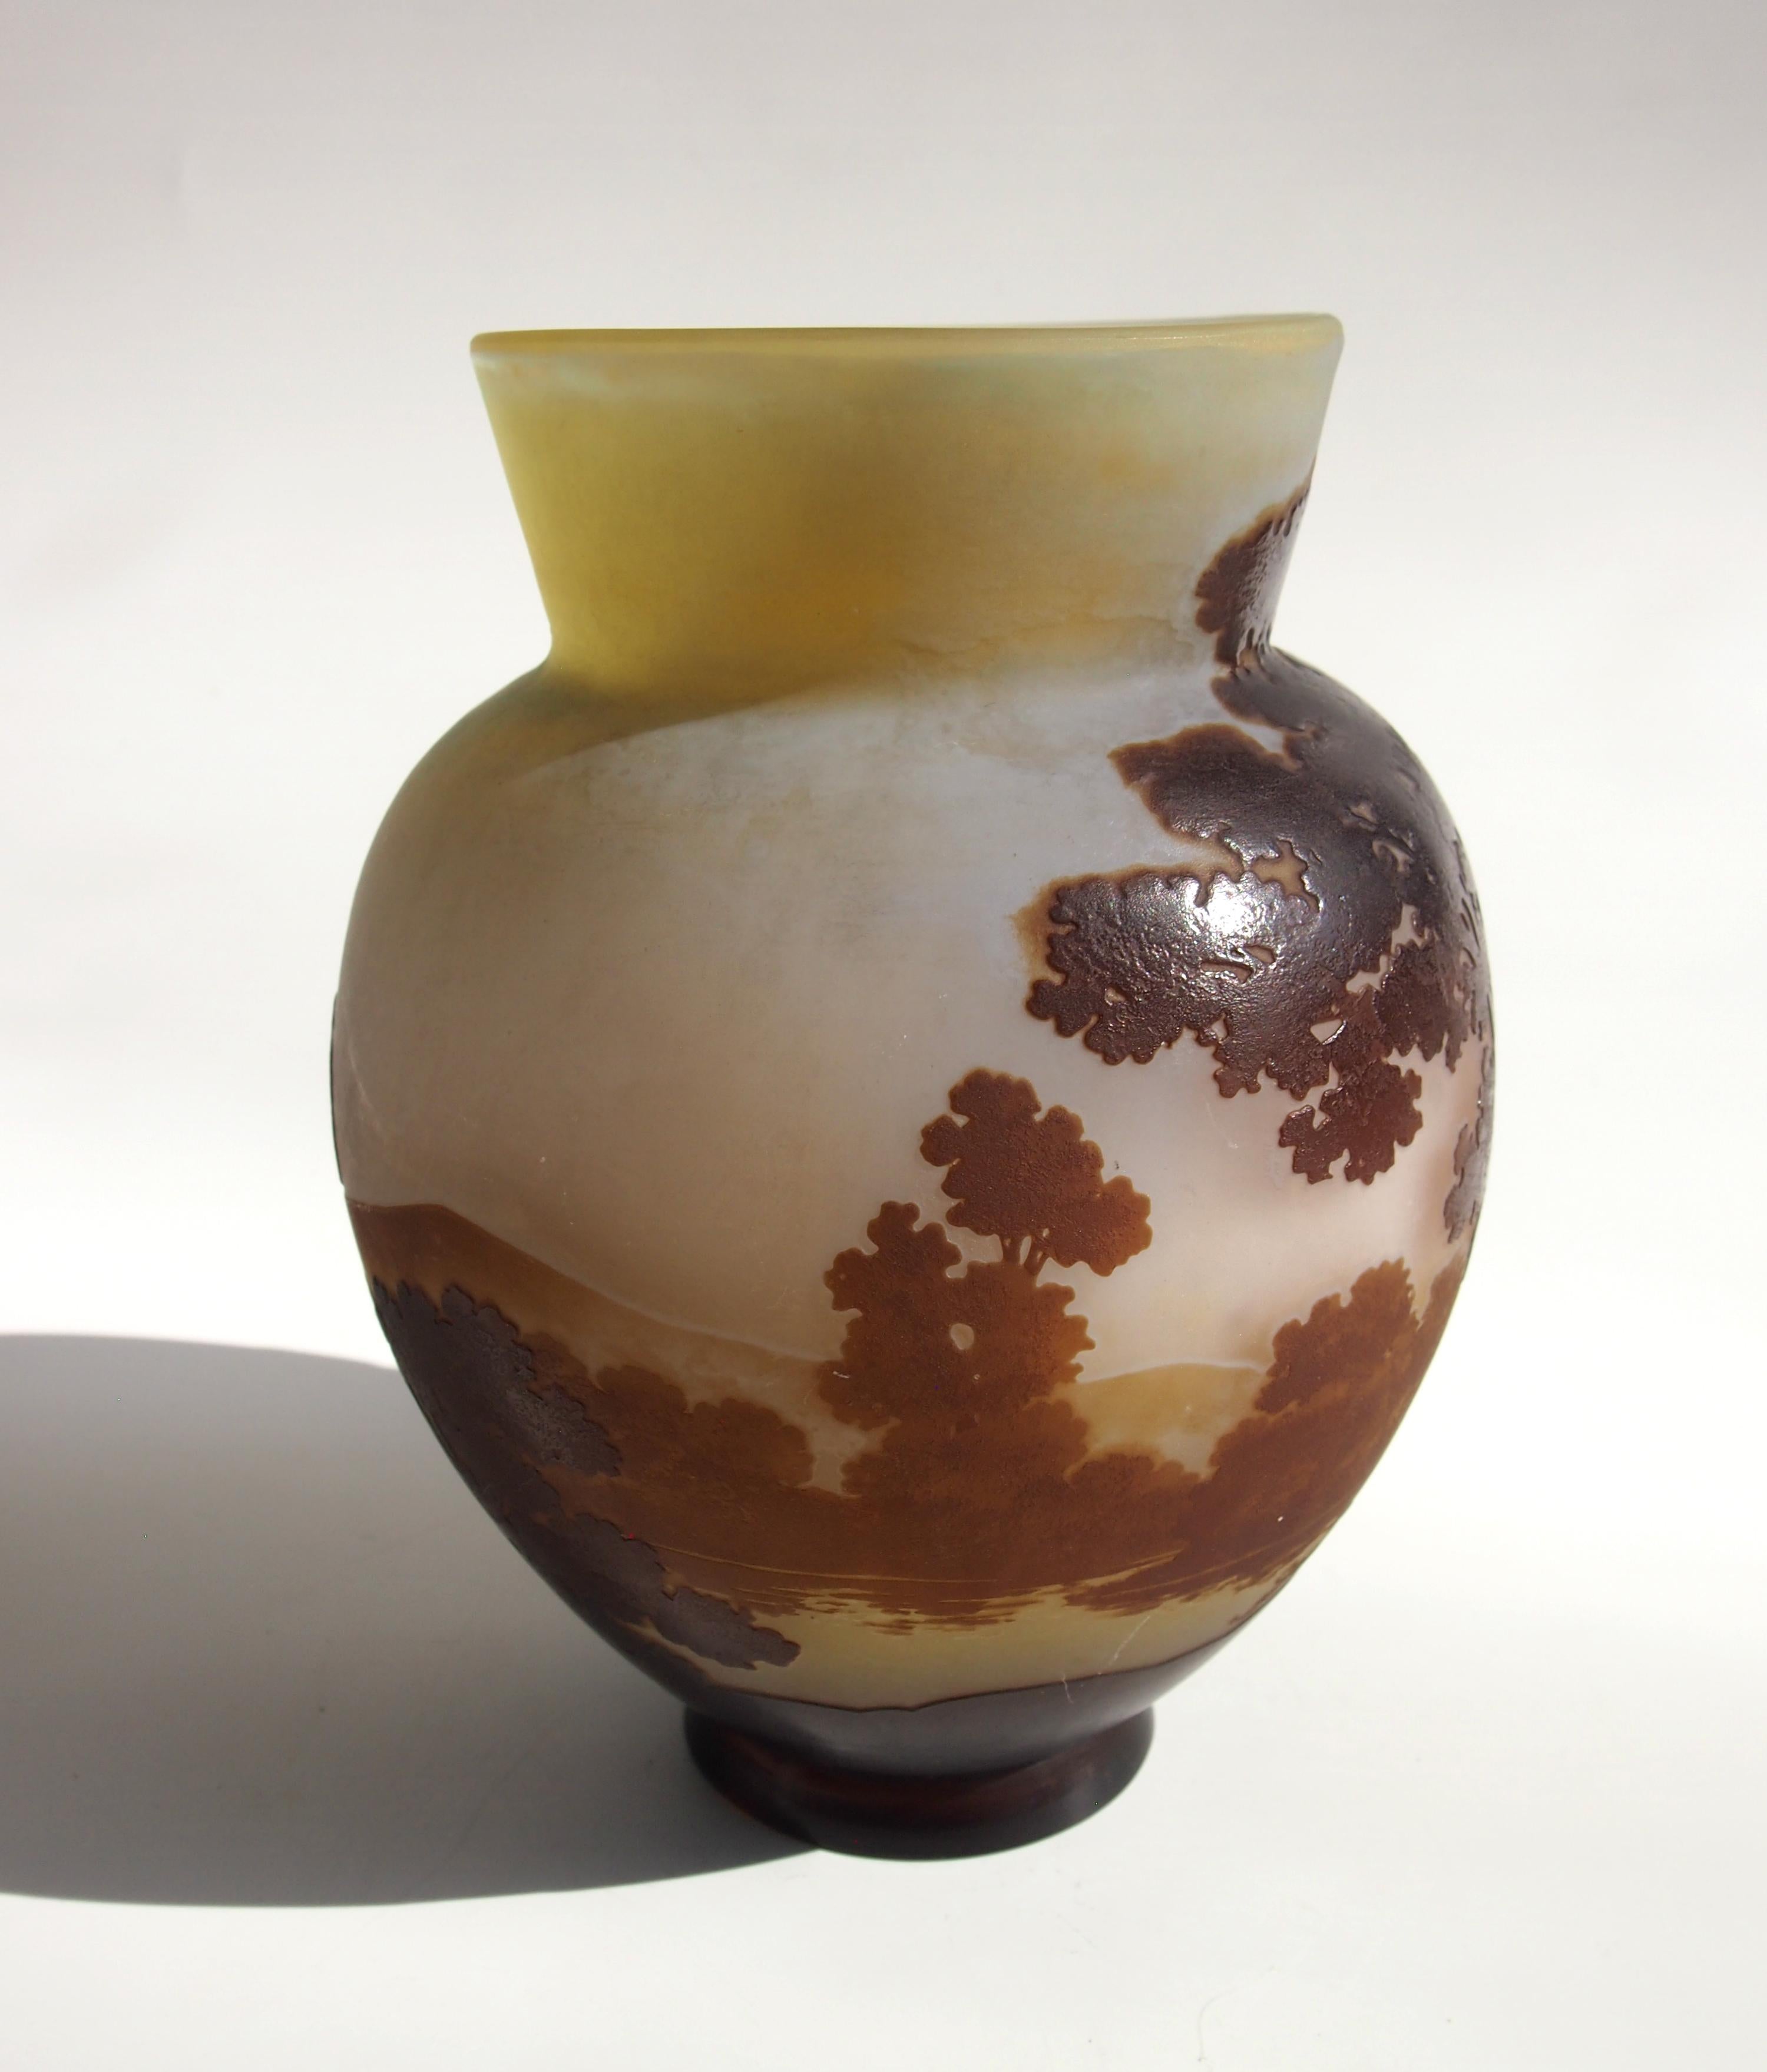 Early 20th Century French Emile Galle Art Nouveau Cameo Glass Landscape Vase, circa 1910 For Sale